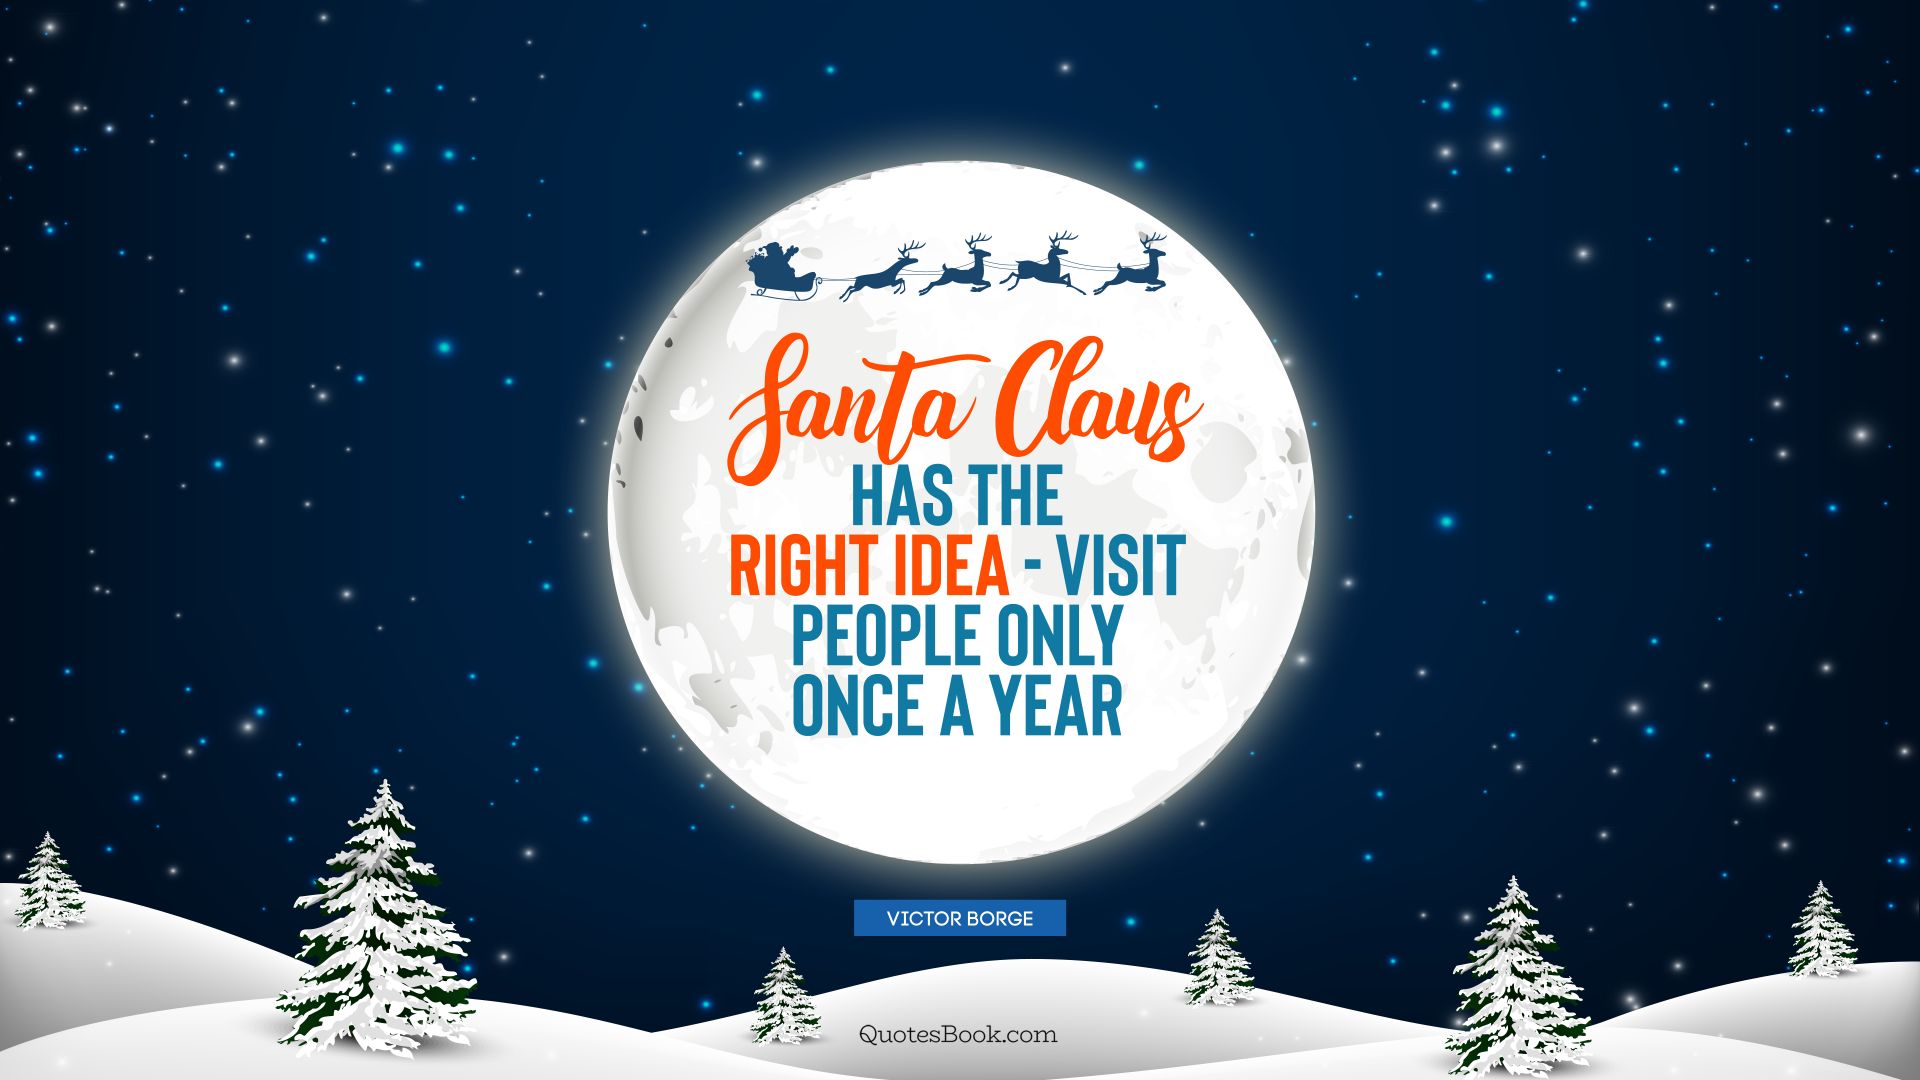 Santa Claus has the right idea - visit people only once a year. - Quote by Victor Borge